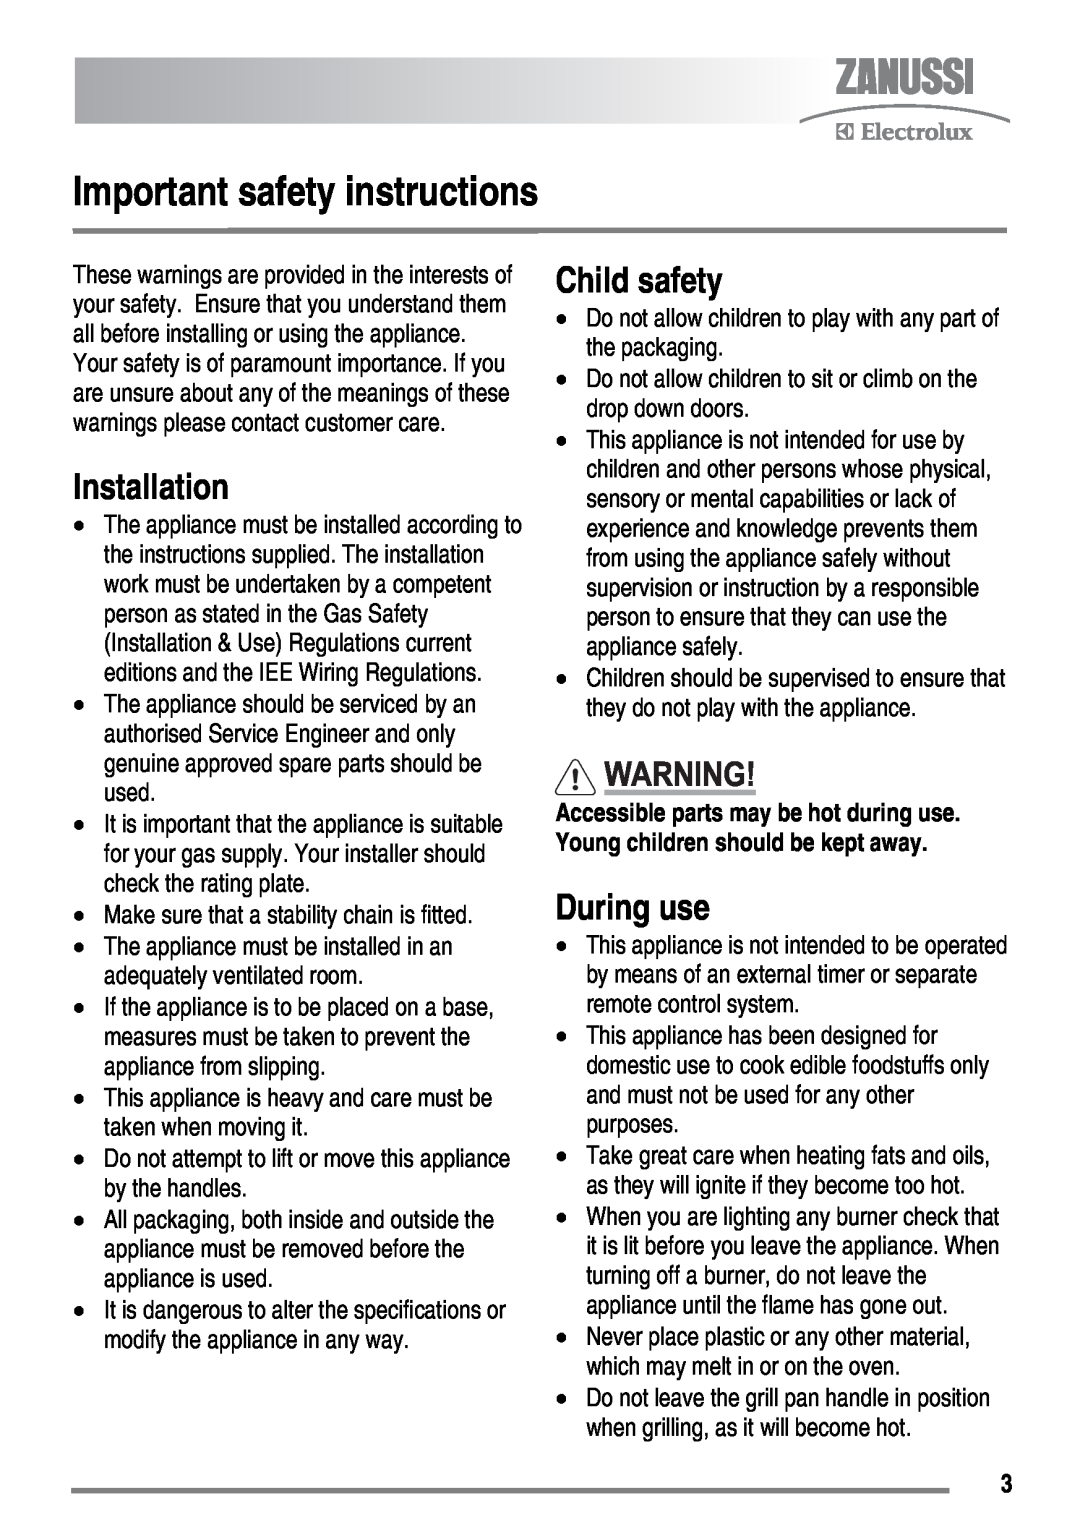 Zanussi ZKG6040 user manual Important safety instructions, Installation, Child safety, During use 